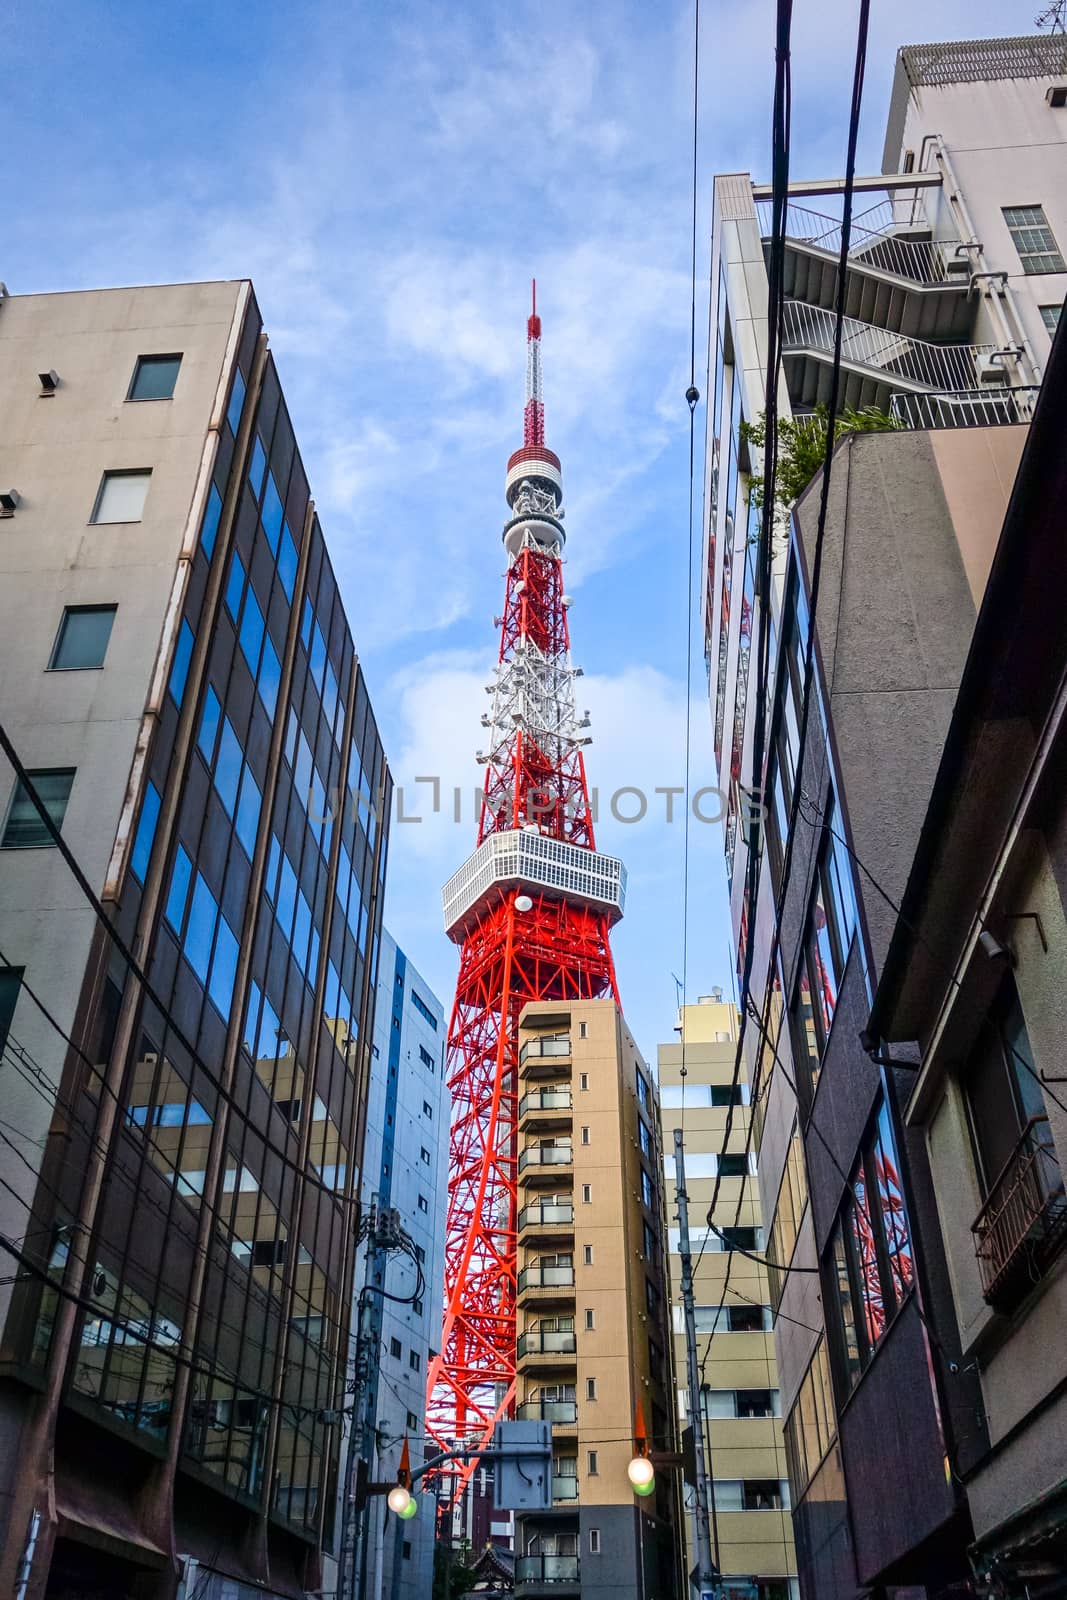 Tokyo tower and buildings, Japan by daboost